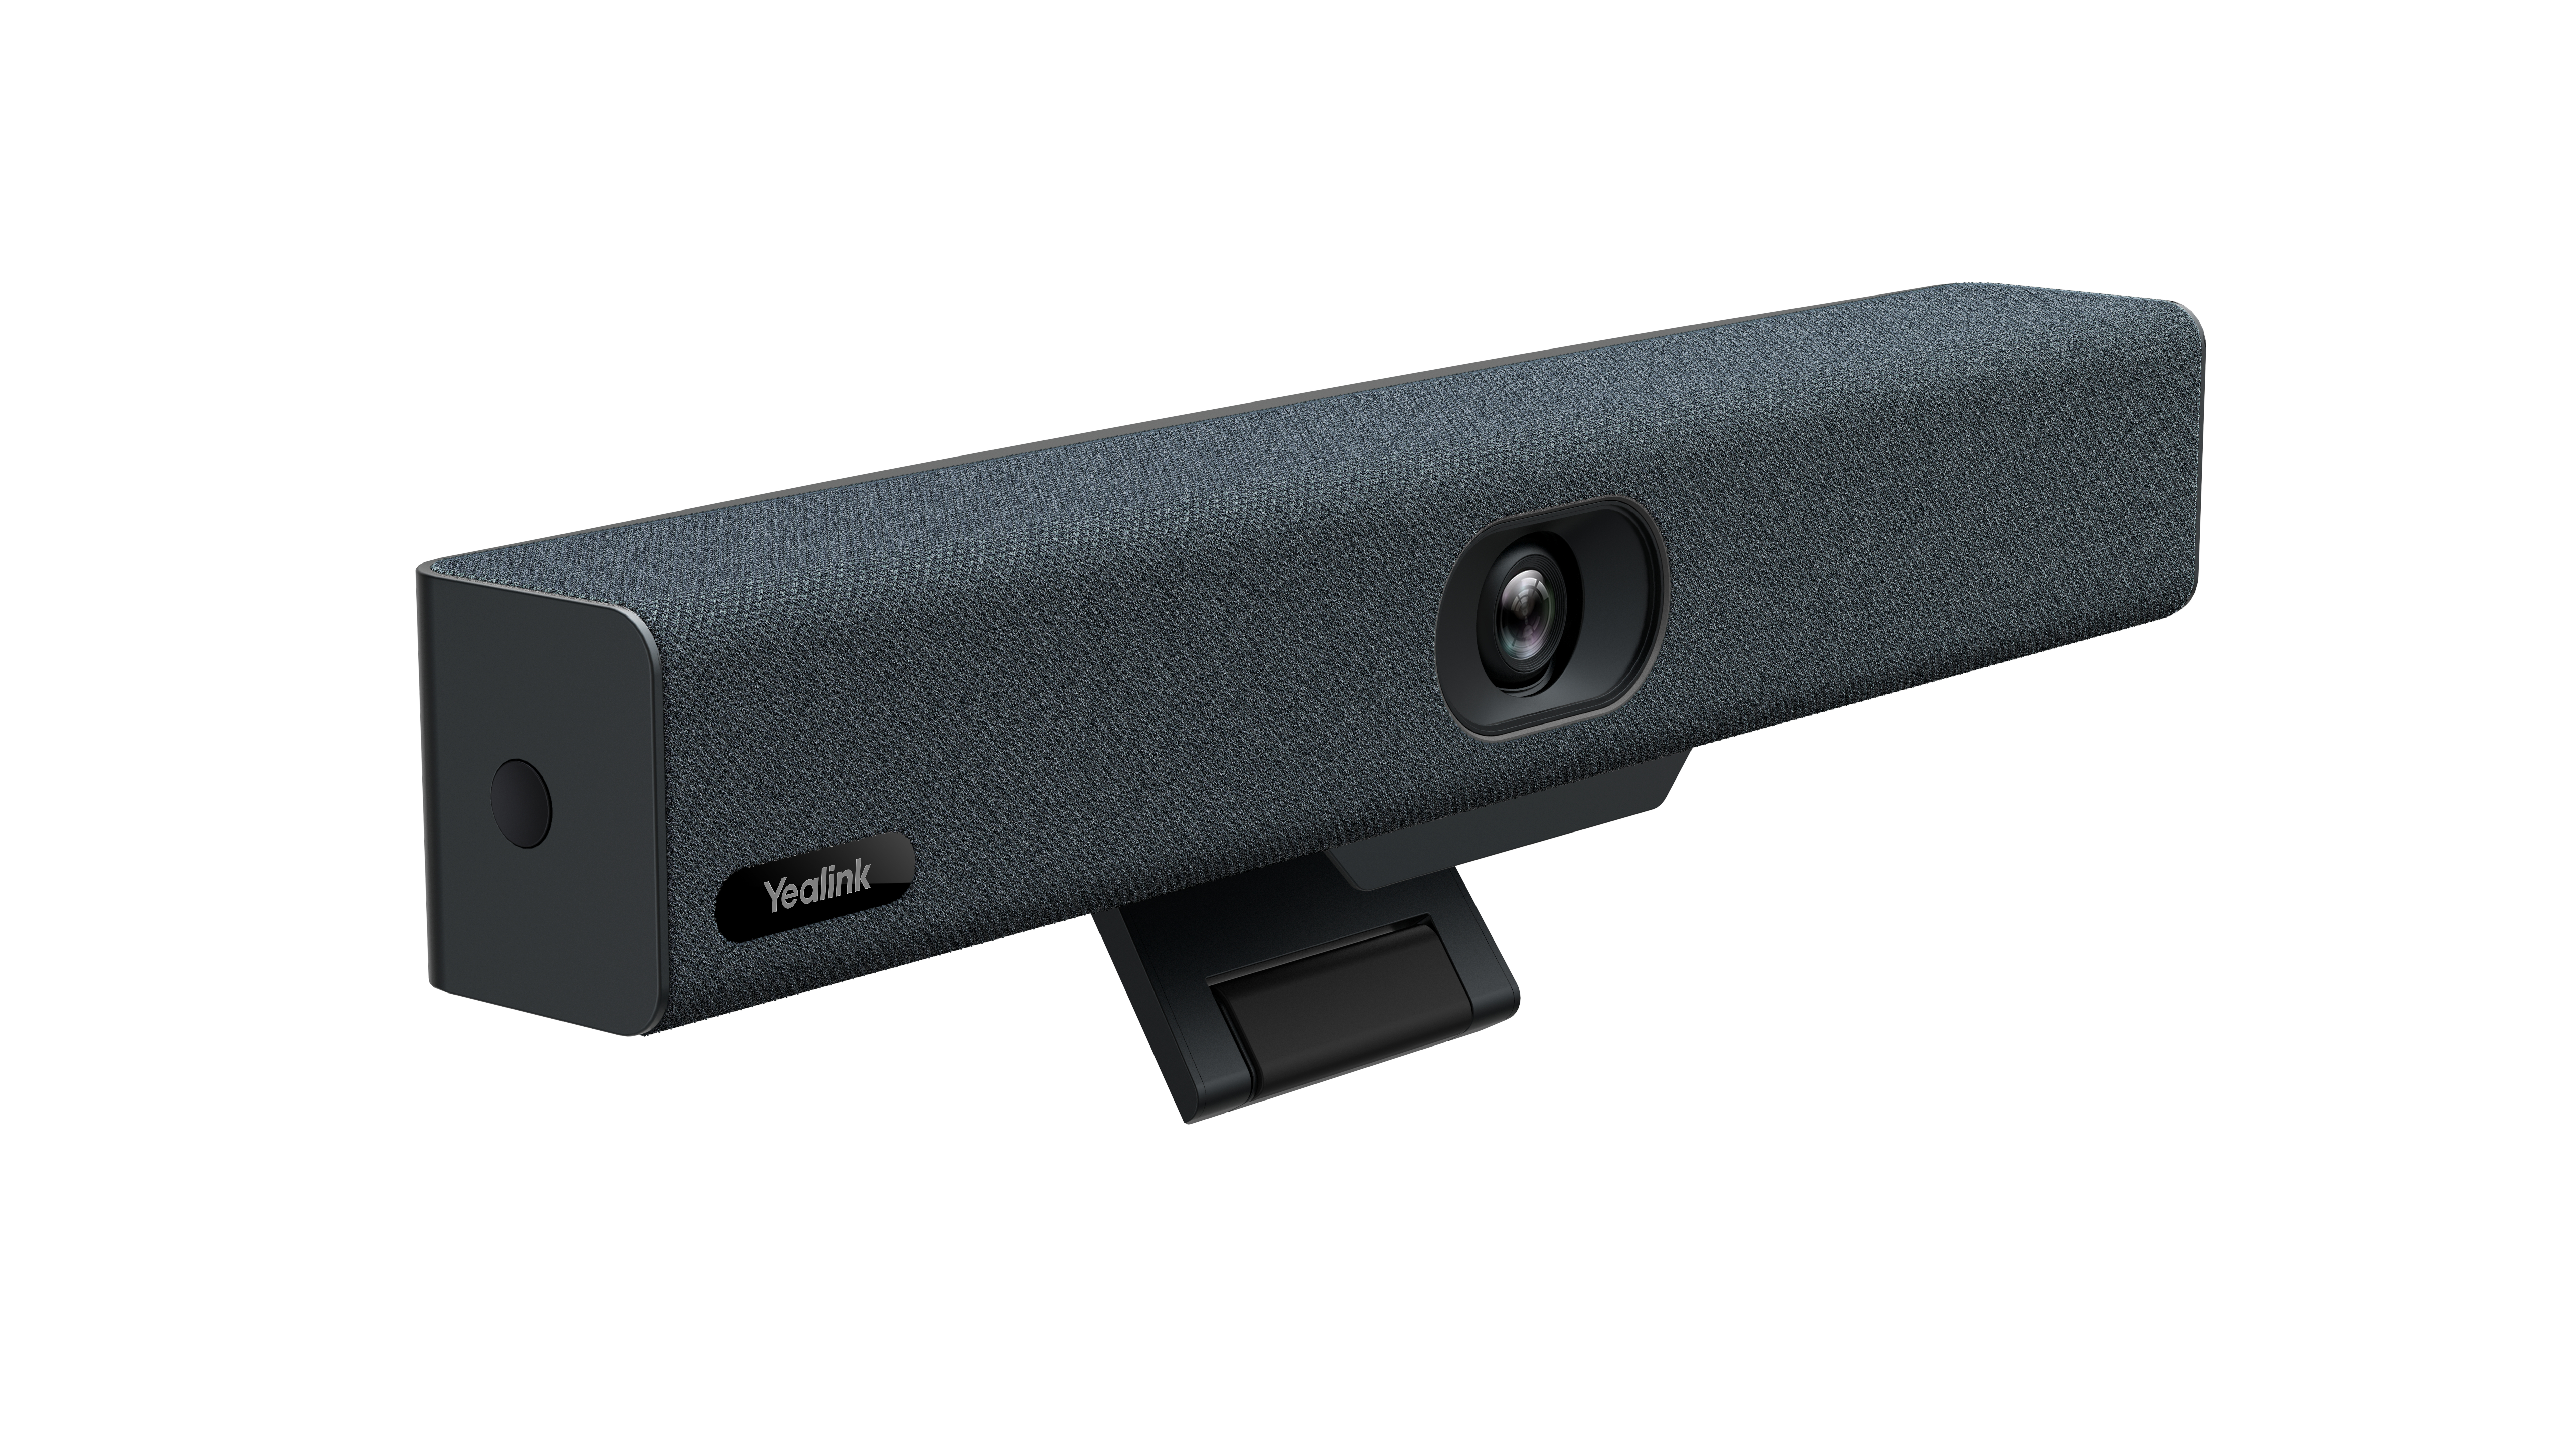 Yealink UVC34 - All-in-one USB video bar - 4K - WiFi - integrated microphones and speakers - for small rooms and huddle rooms